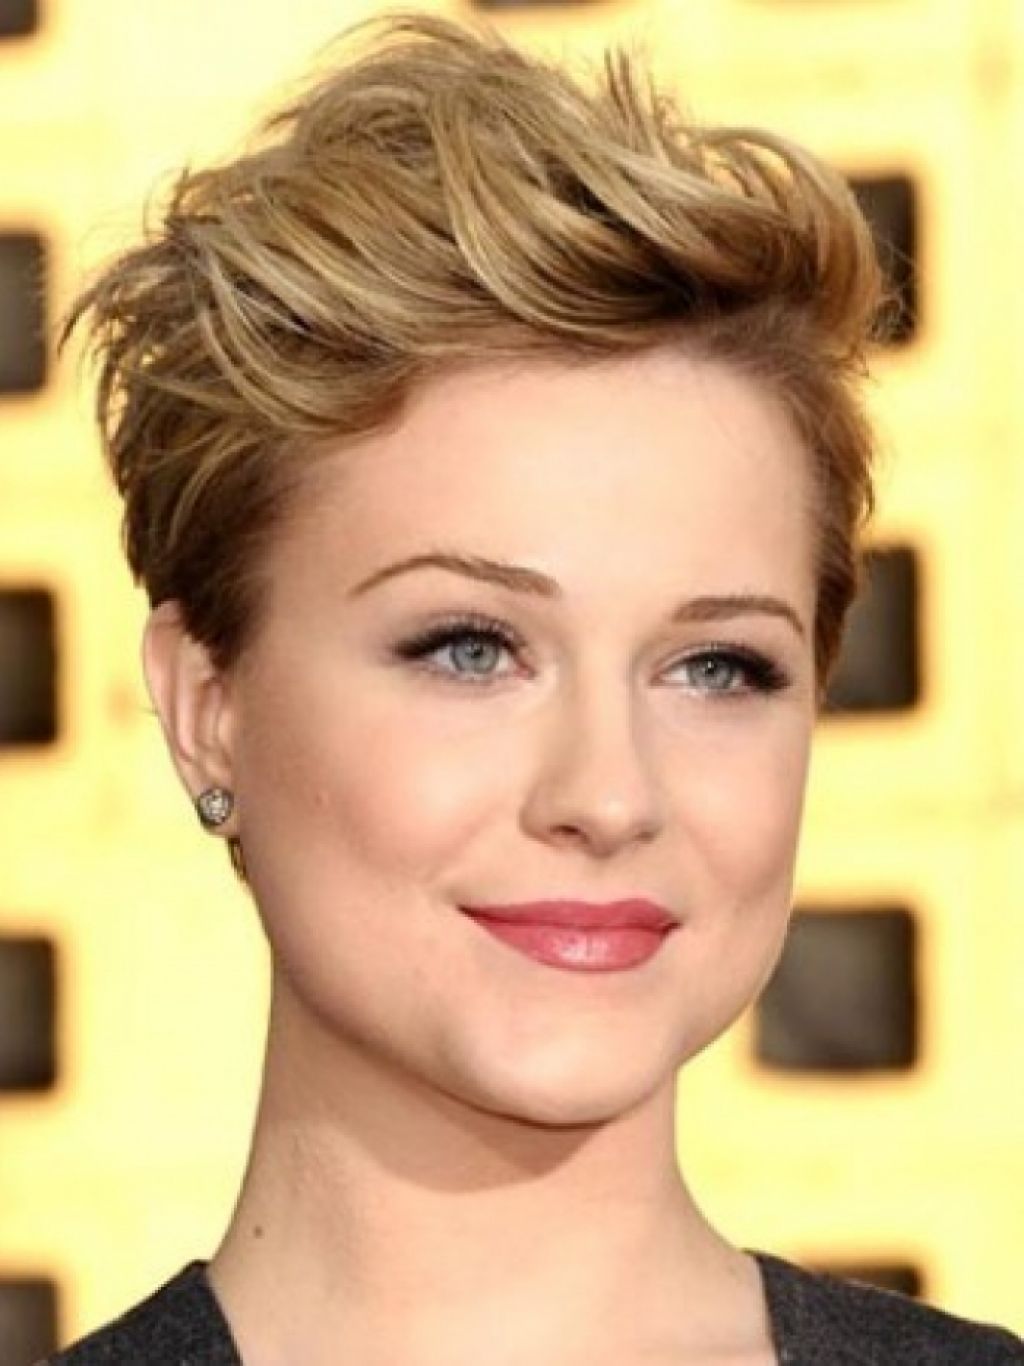 pixie-haircut-round-face-hairstyle-for-women-5552efb439958